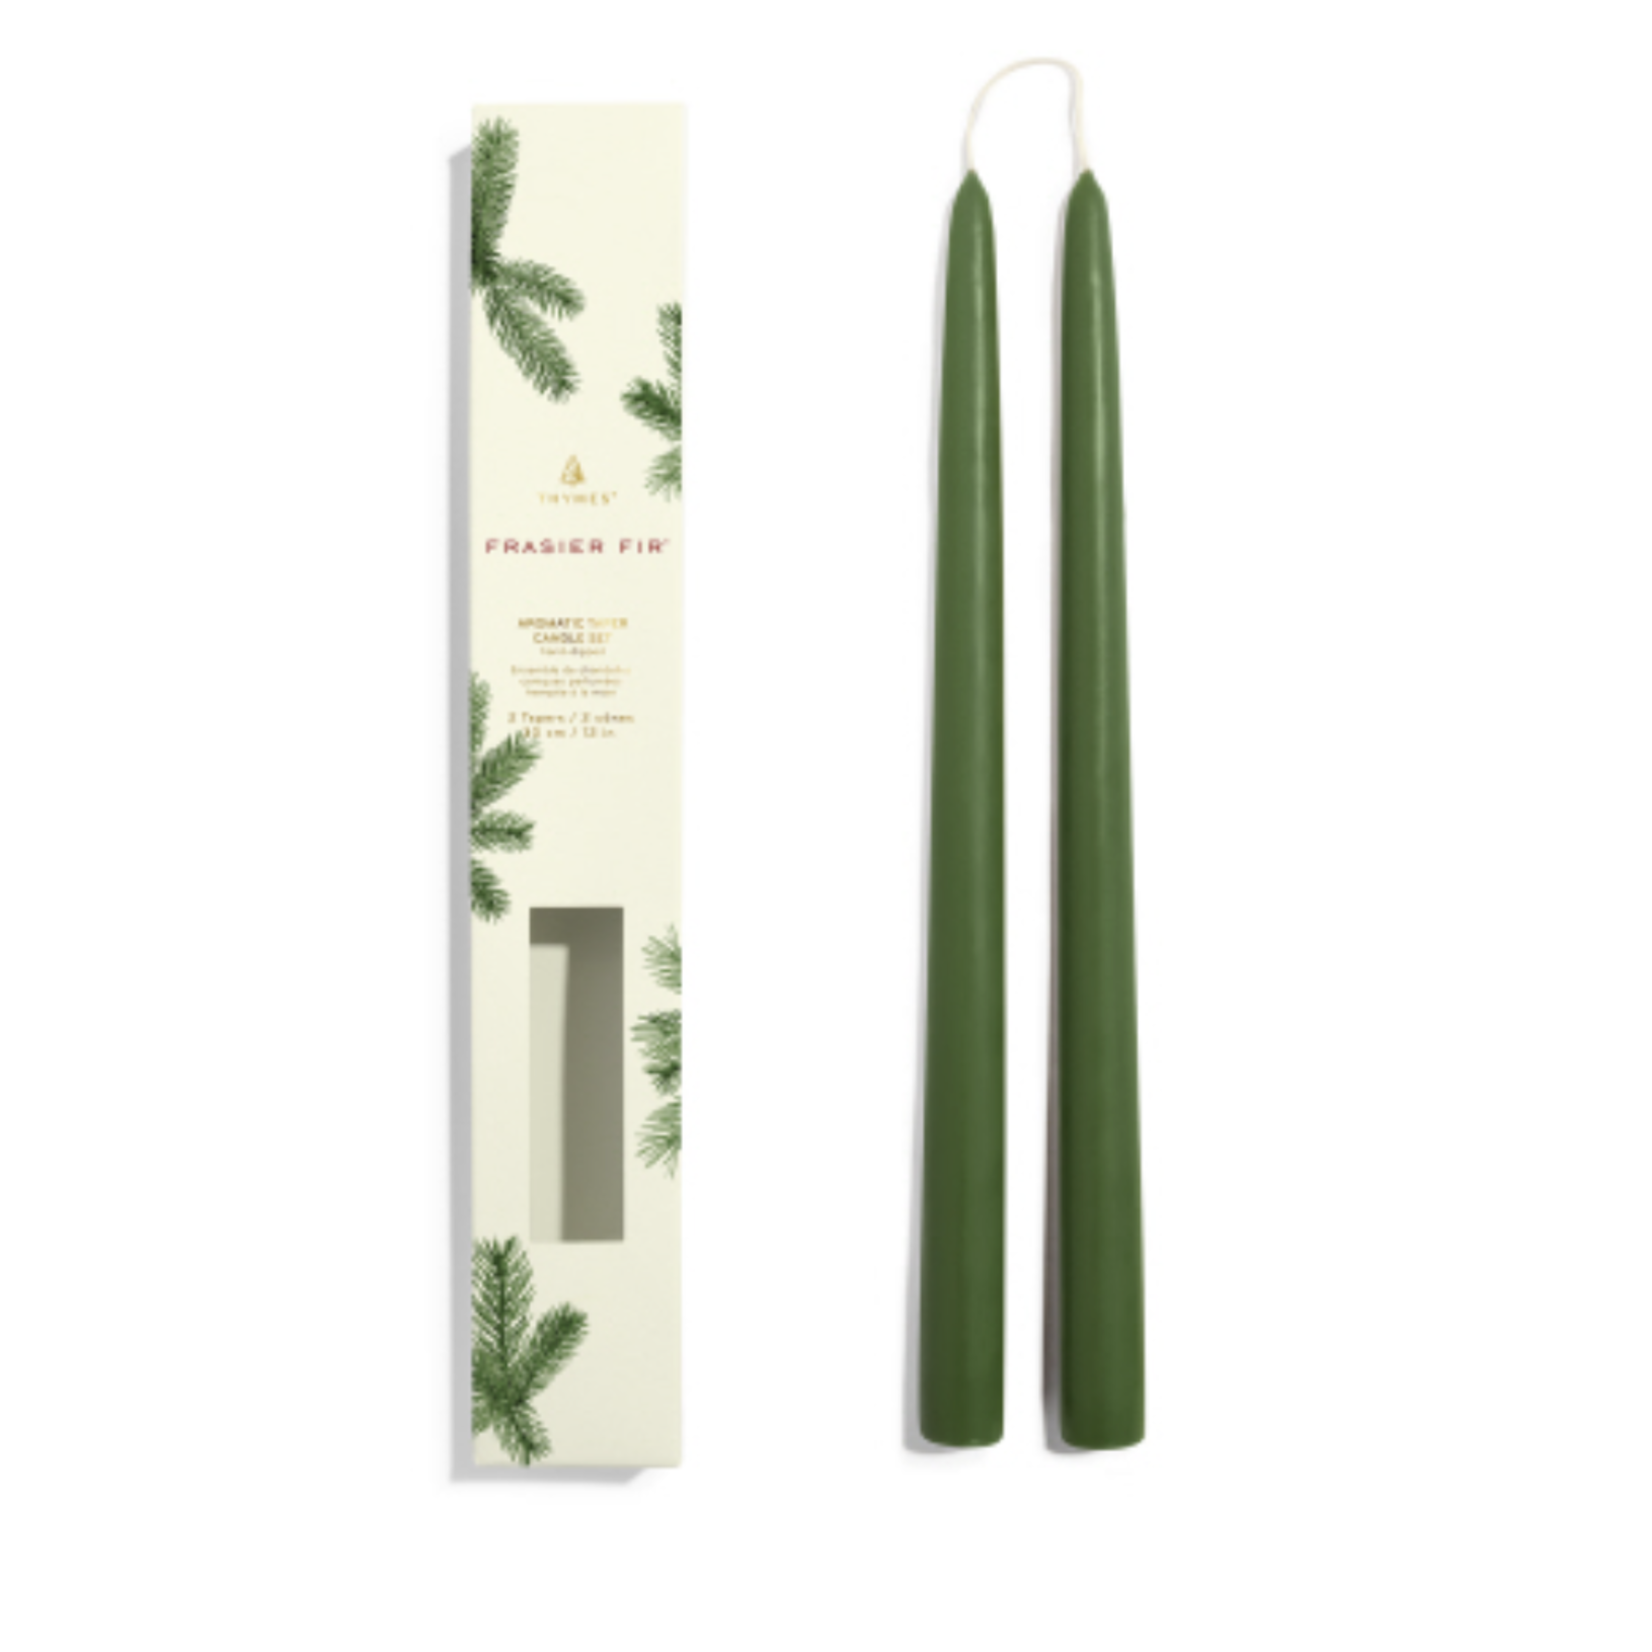 Thymes Frasier Fir Collection Gift Set